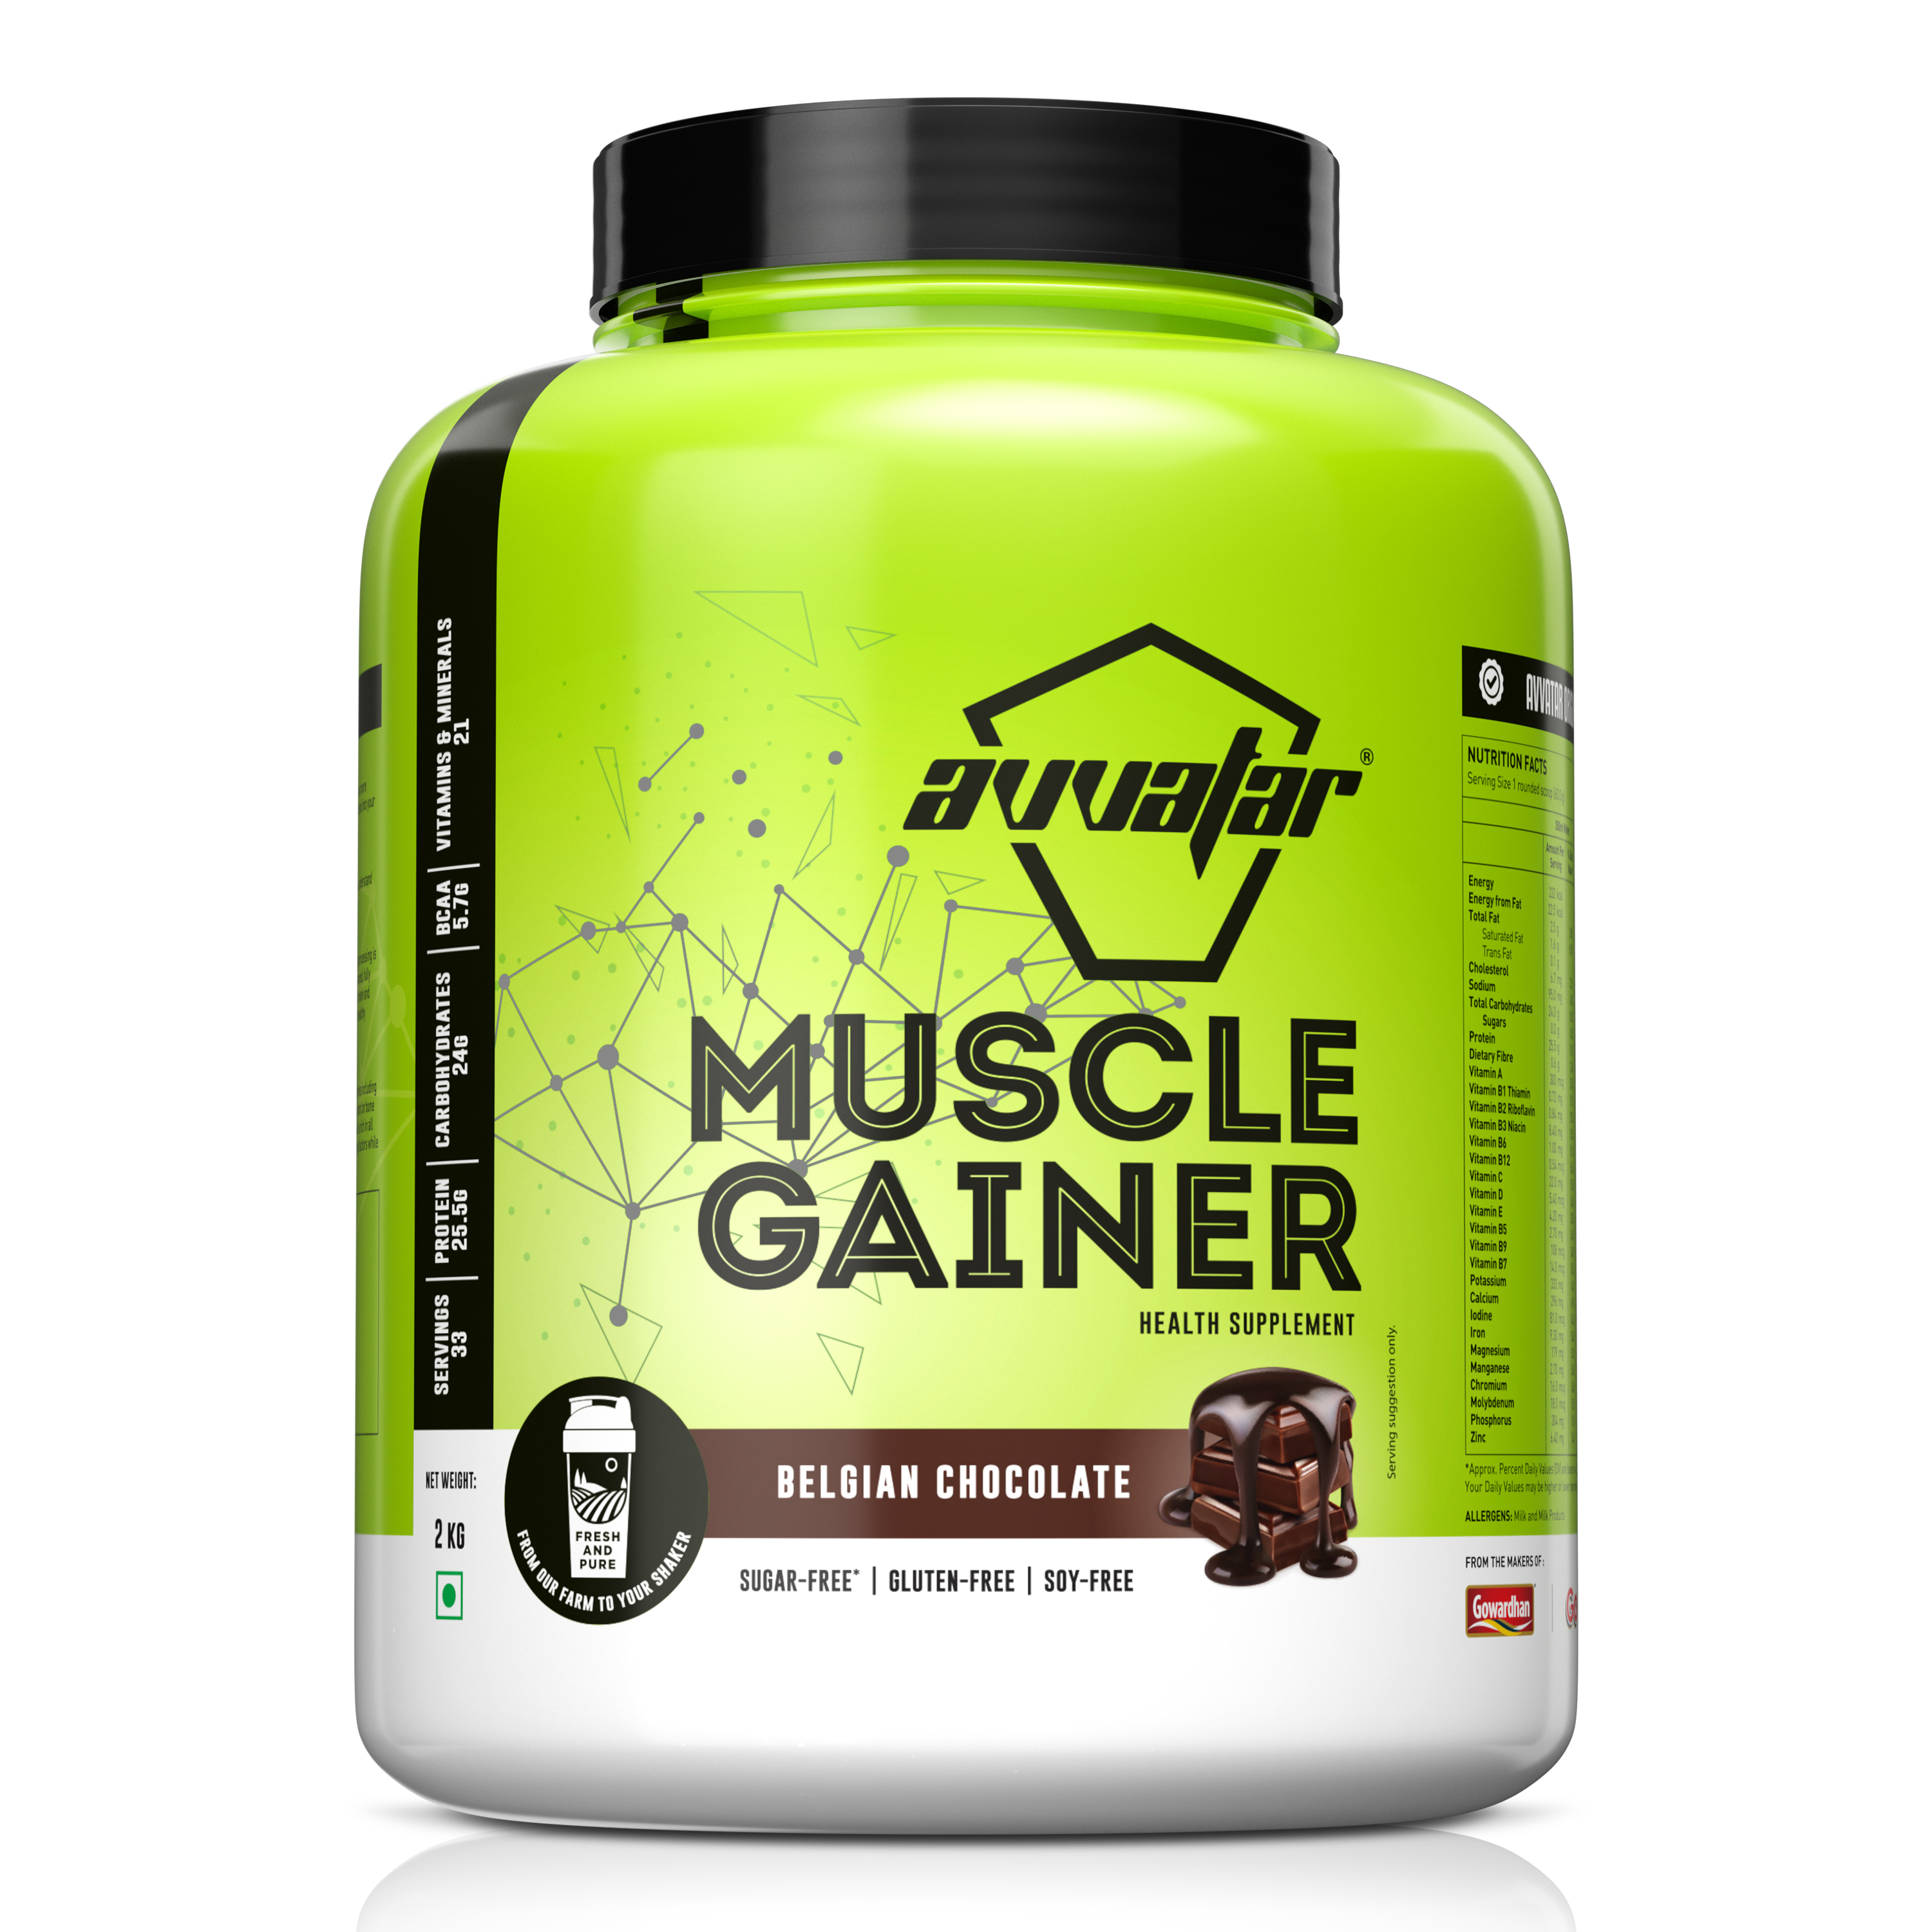 Get stronger & fit with Avvatar's Belgian Chocolate Muscle Gainer. Packed with essential nutrients, this 2 kg gym protein powder will transform your workouts.